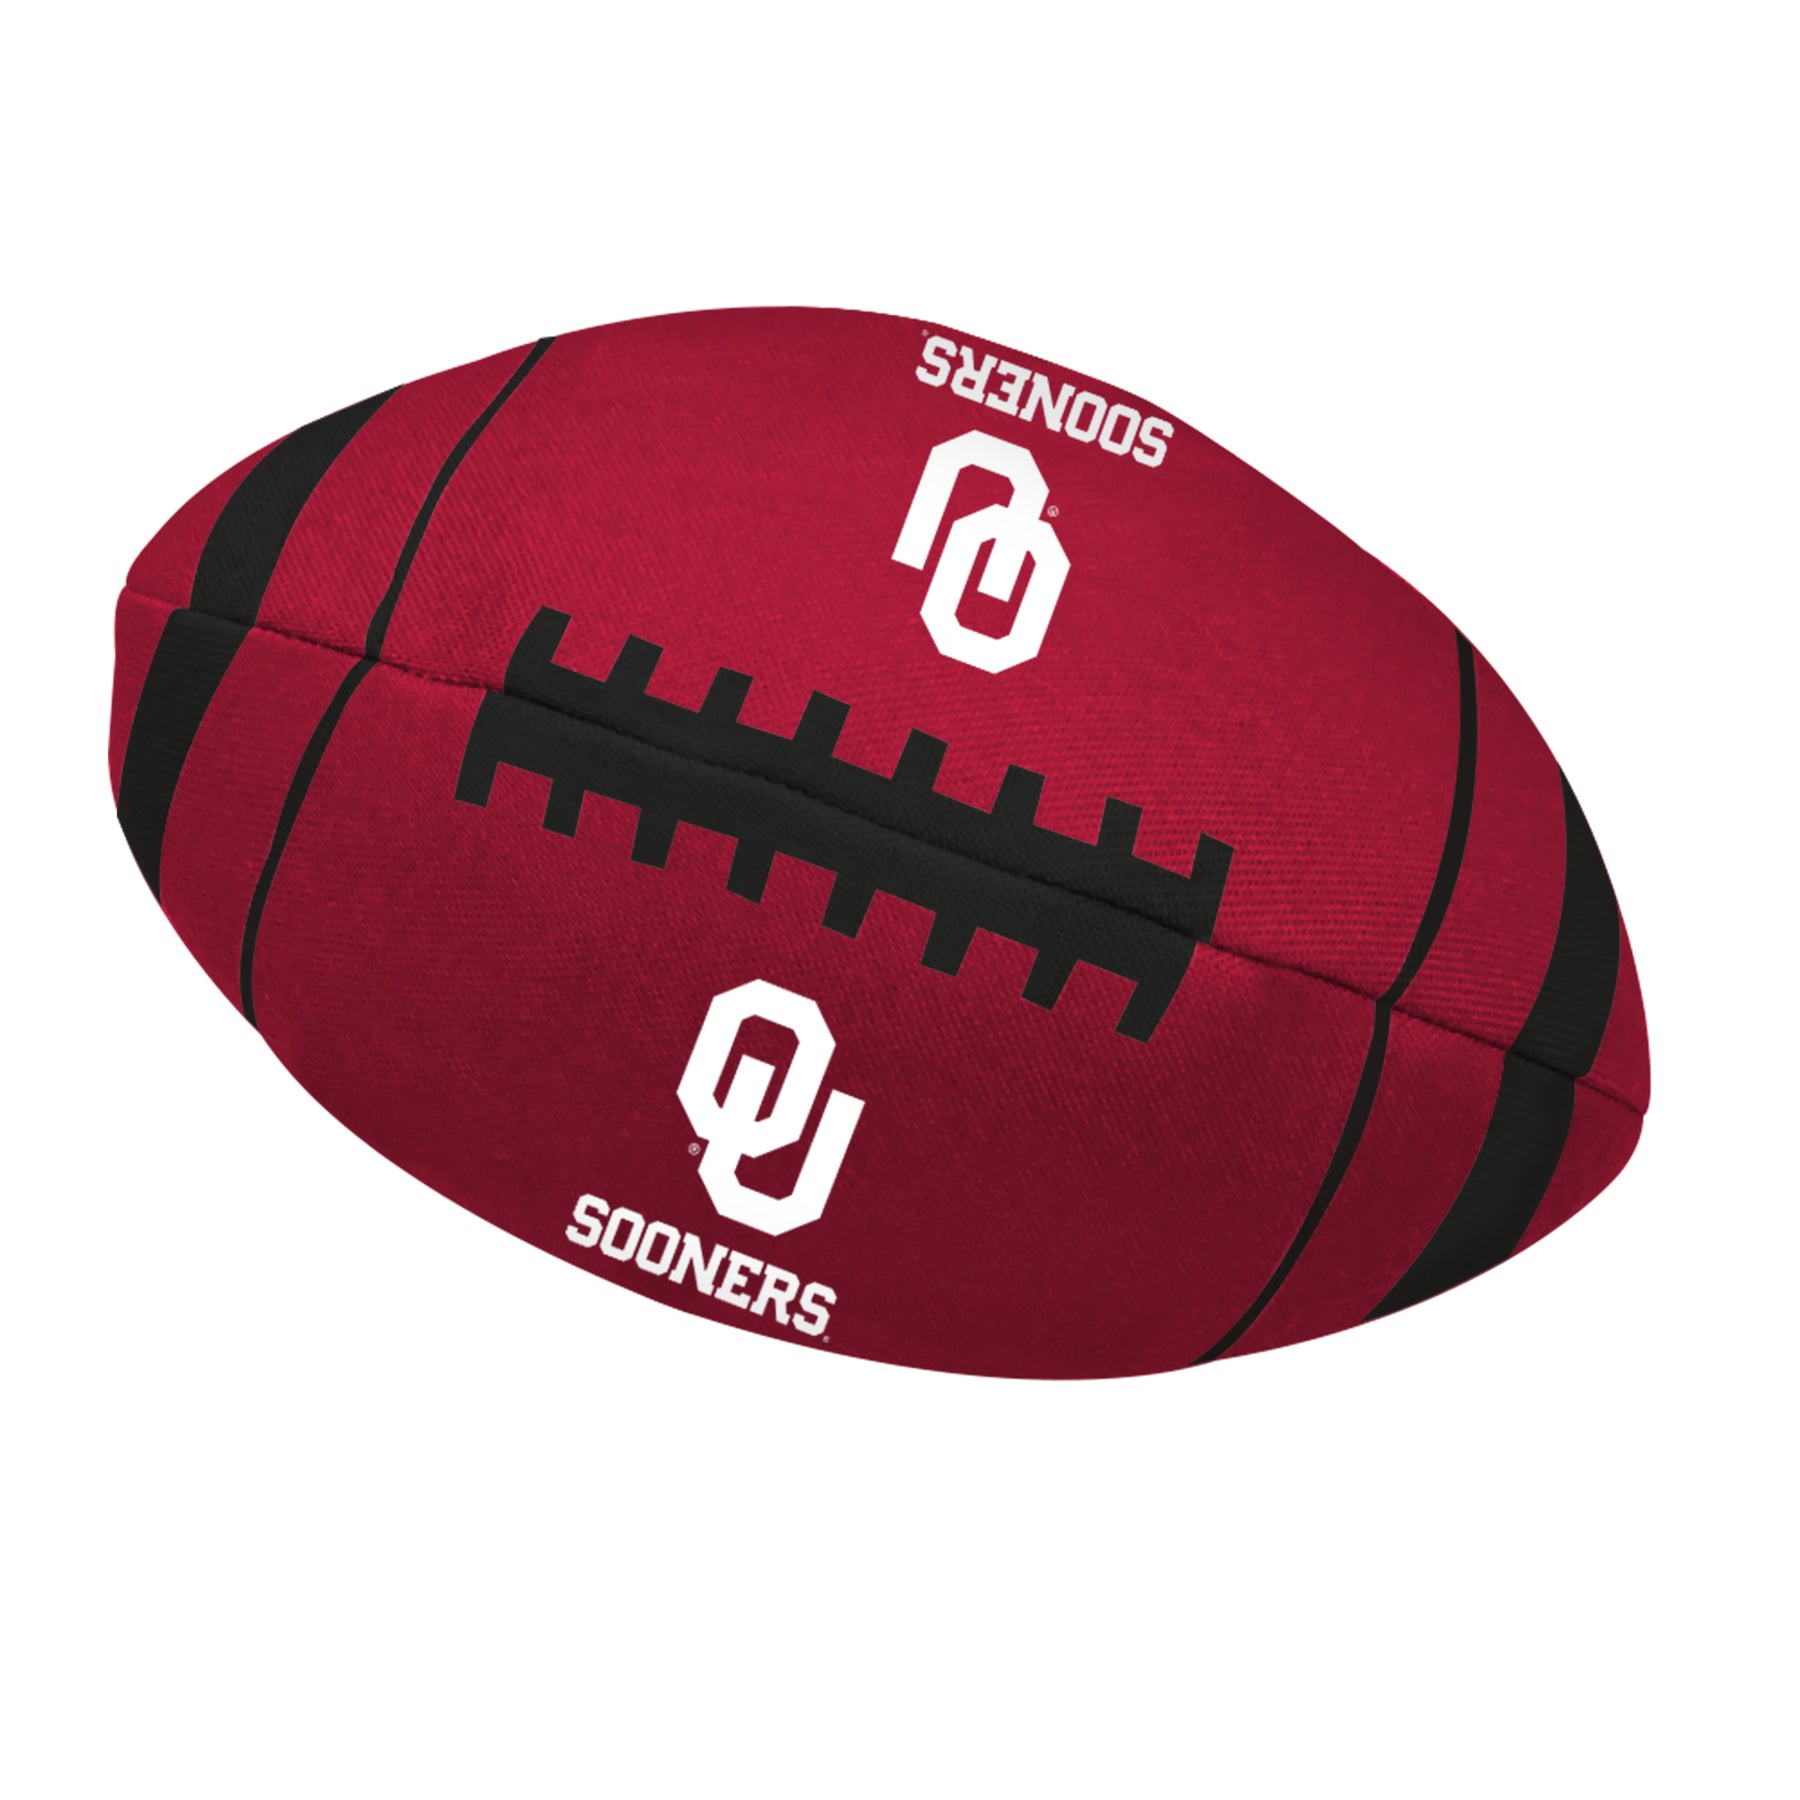 All Star Dogs - Football Toy OU